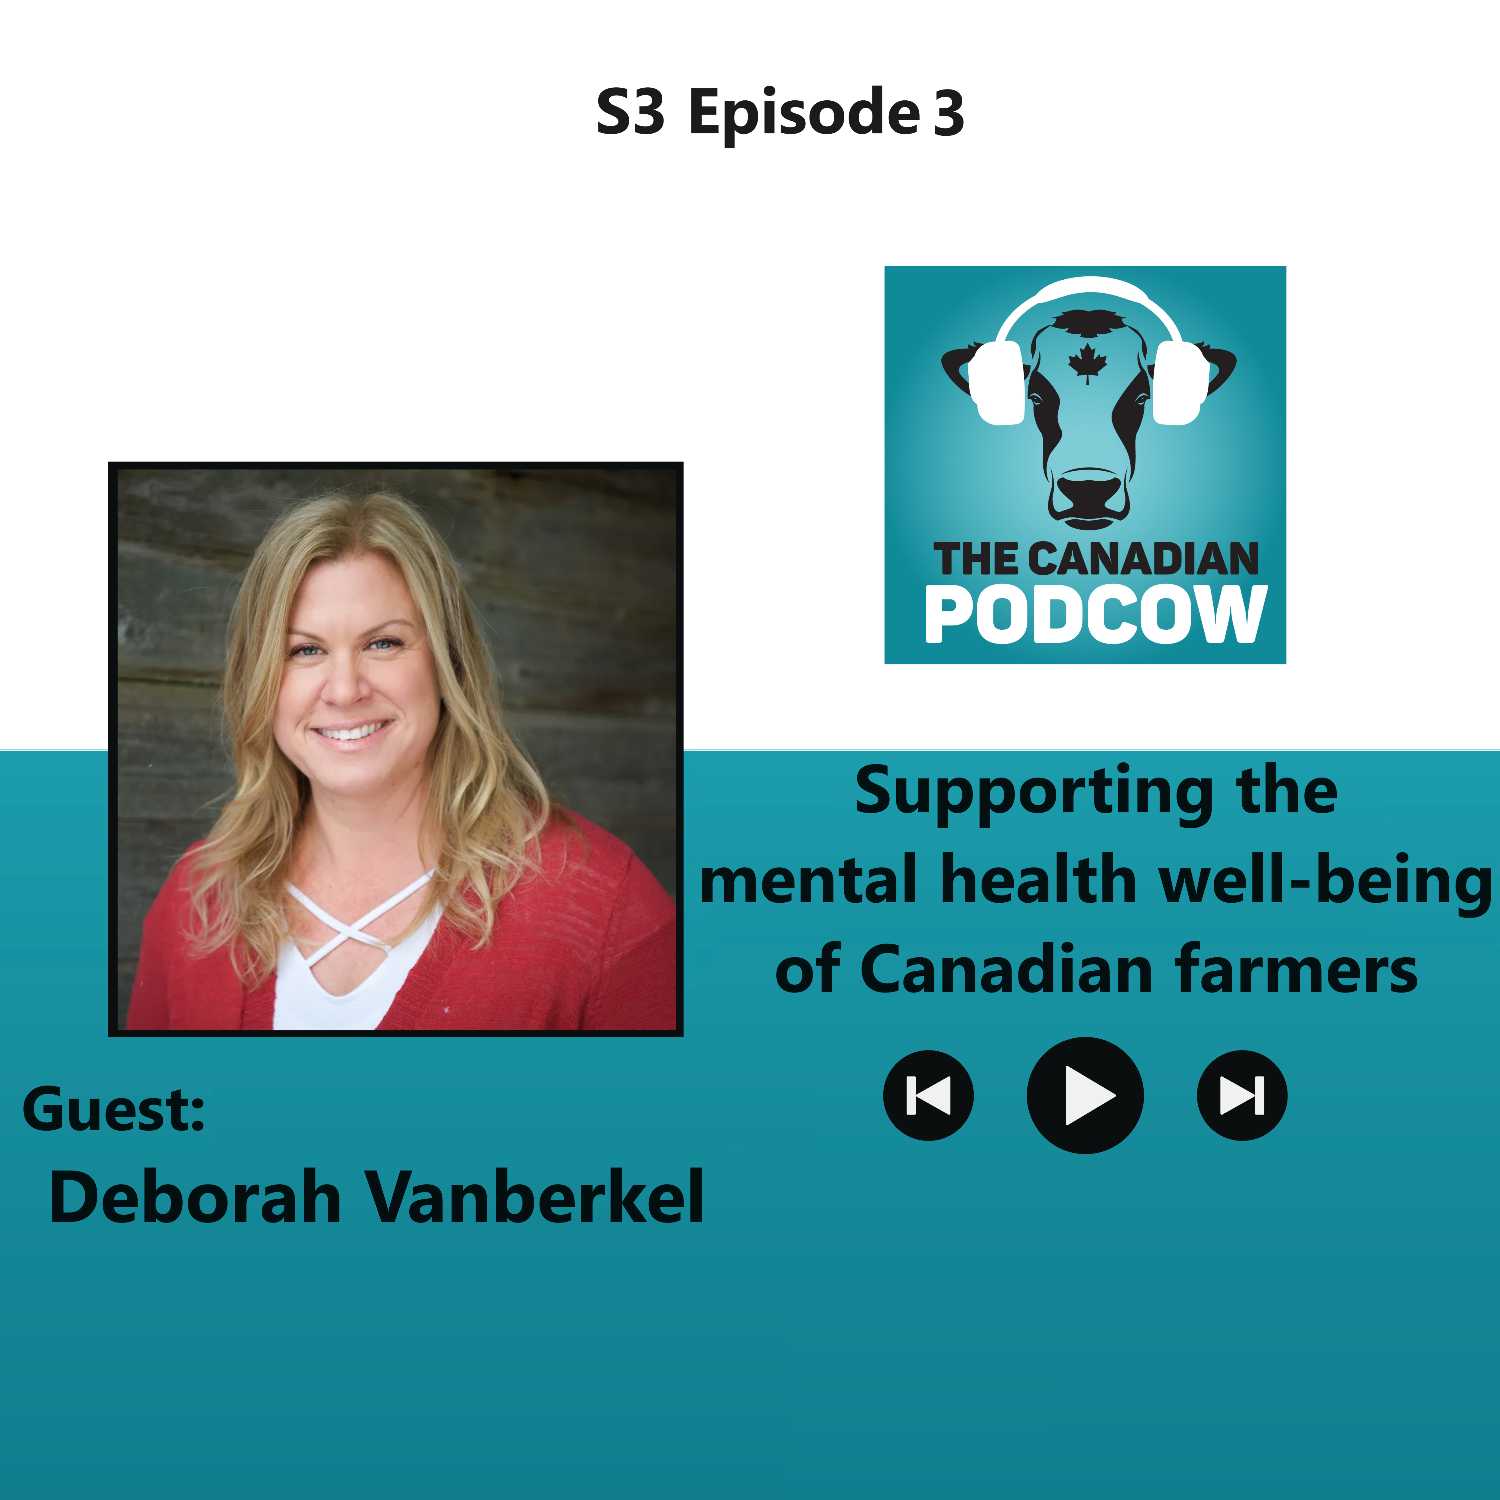 Supporting the mental health well-being of Canadian farmers